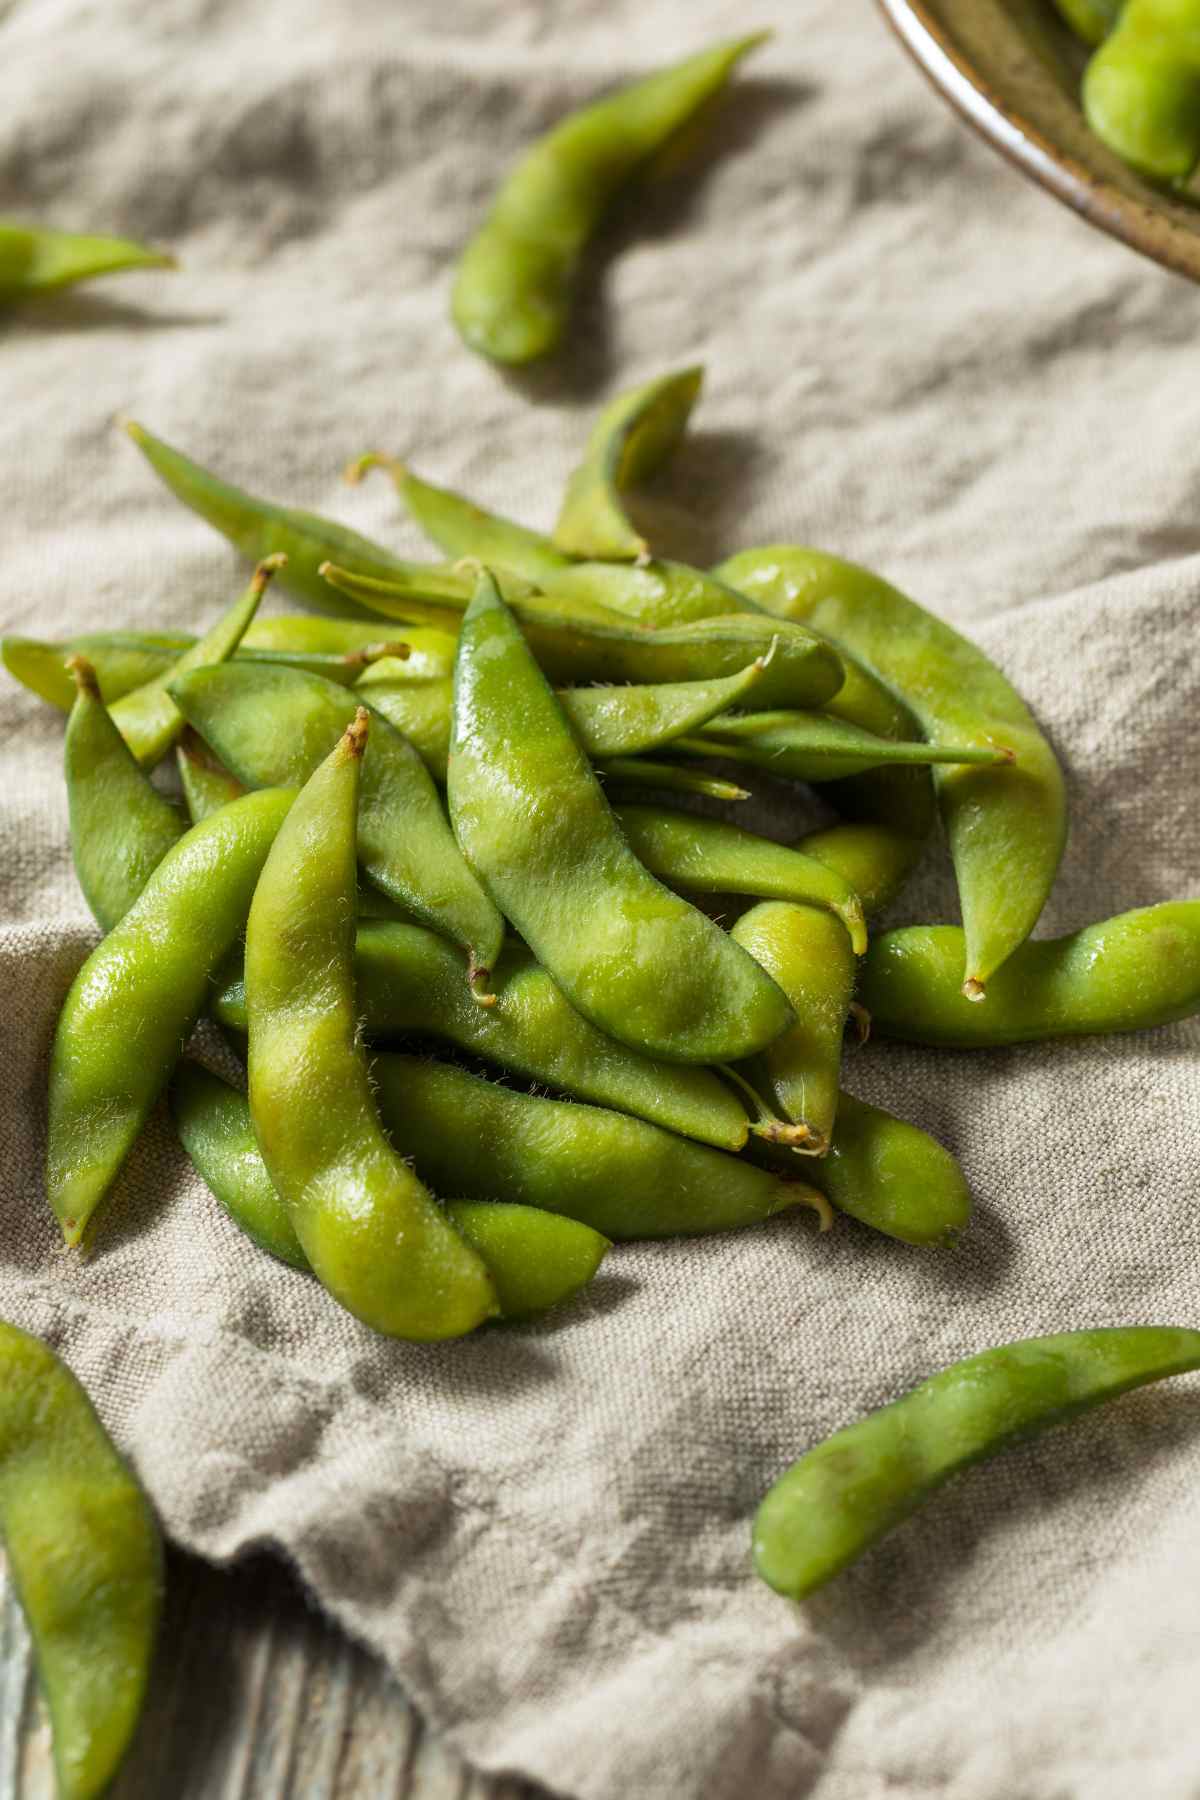 Wondering if you can have edamame on a keto diet? Need to know the carb count for these tasty green soybeans? Although legumes are usually a no-go on keto, edamame is a unique exception to this rule. Keep reading to learn more.